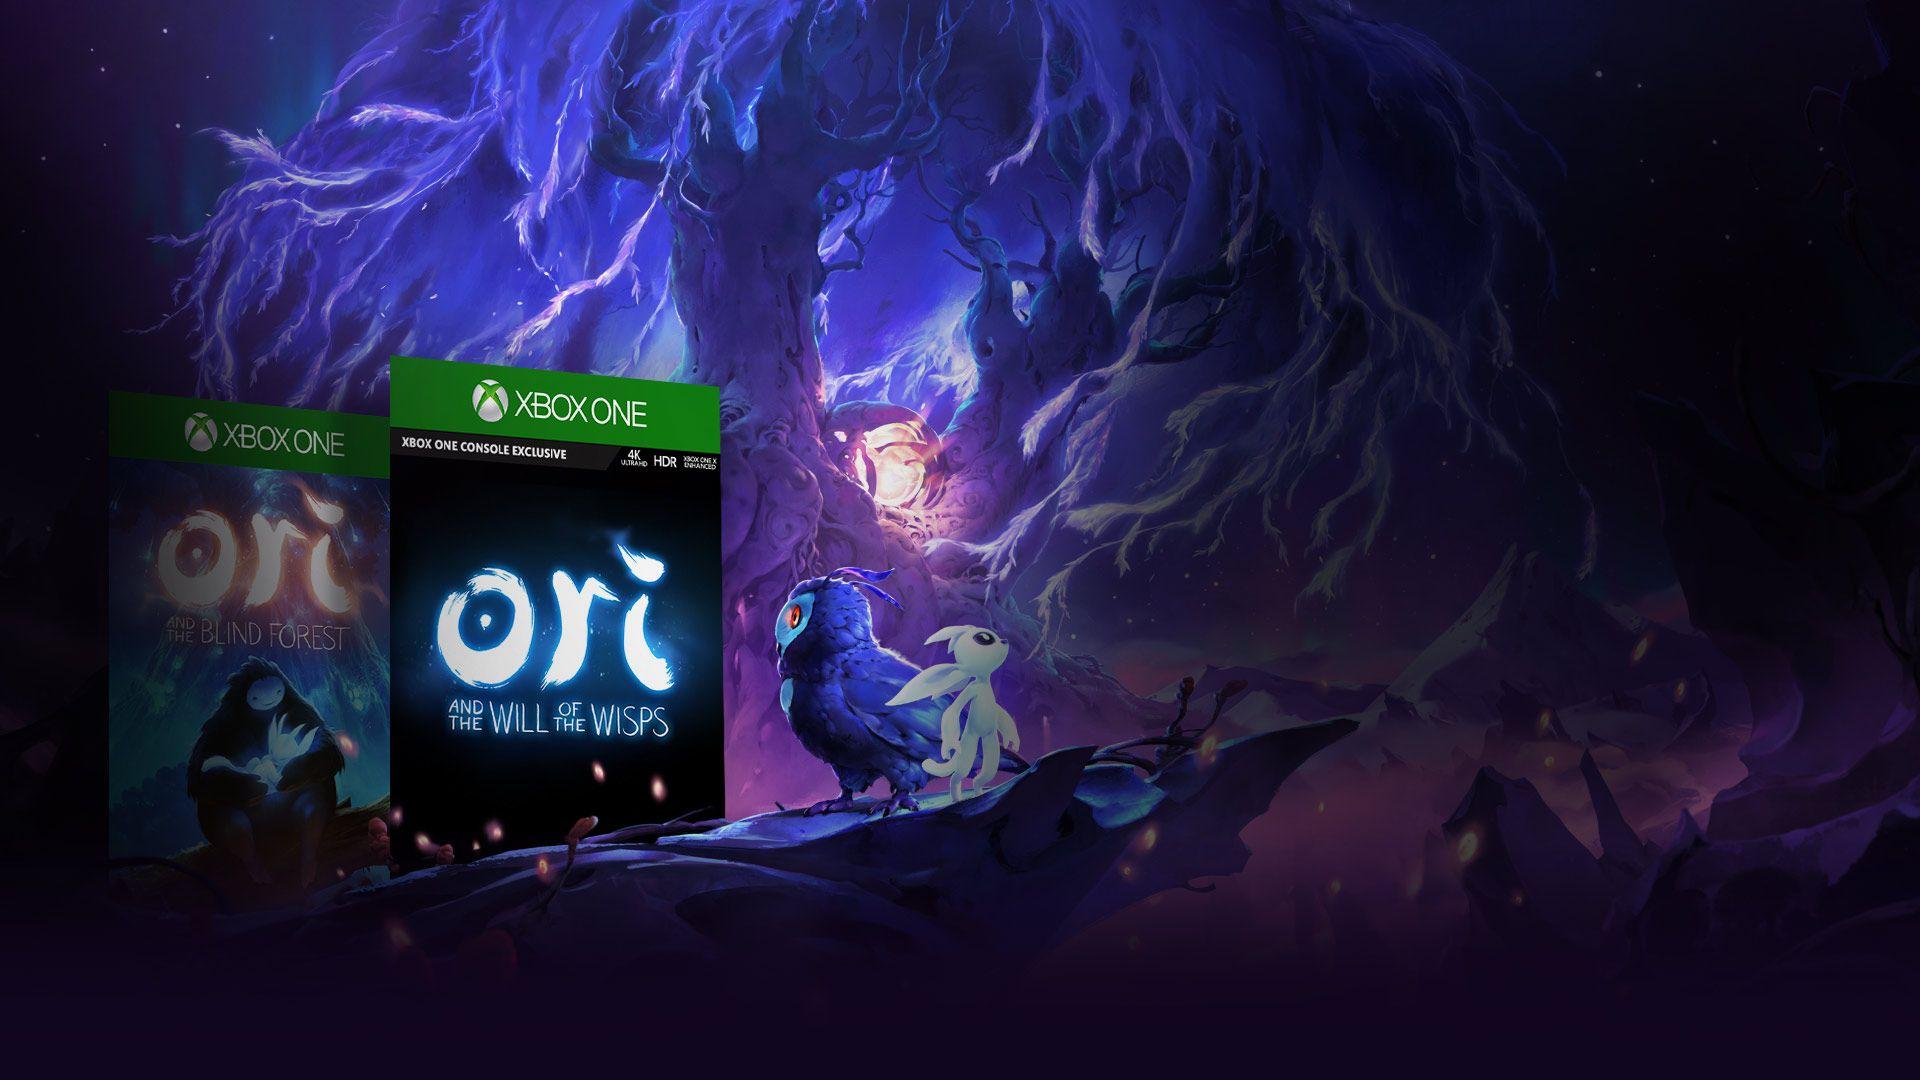 Ori And The Will Of The Wisps for Xbox One